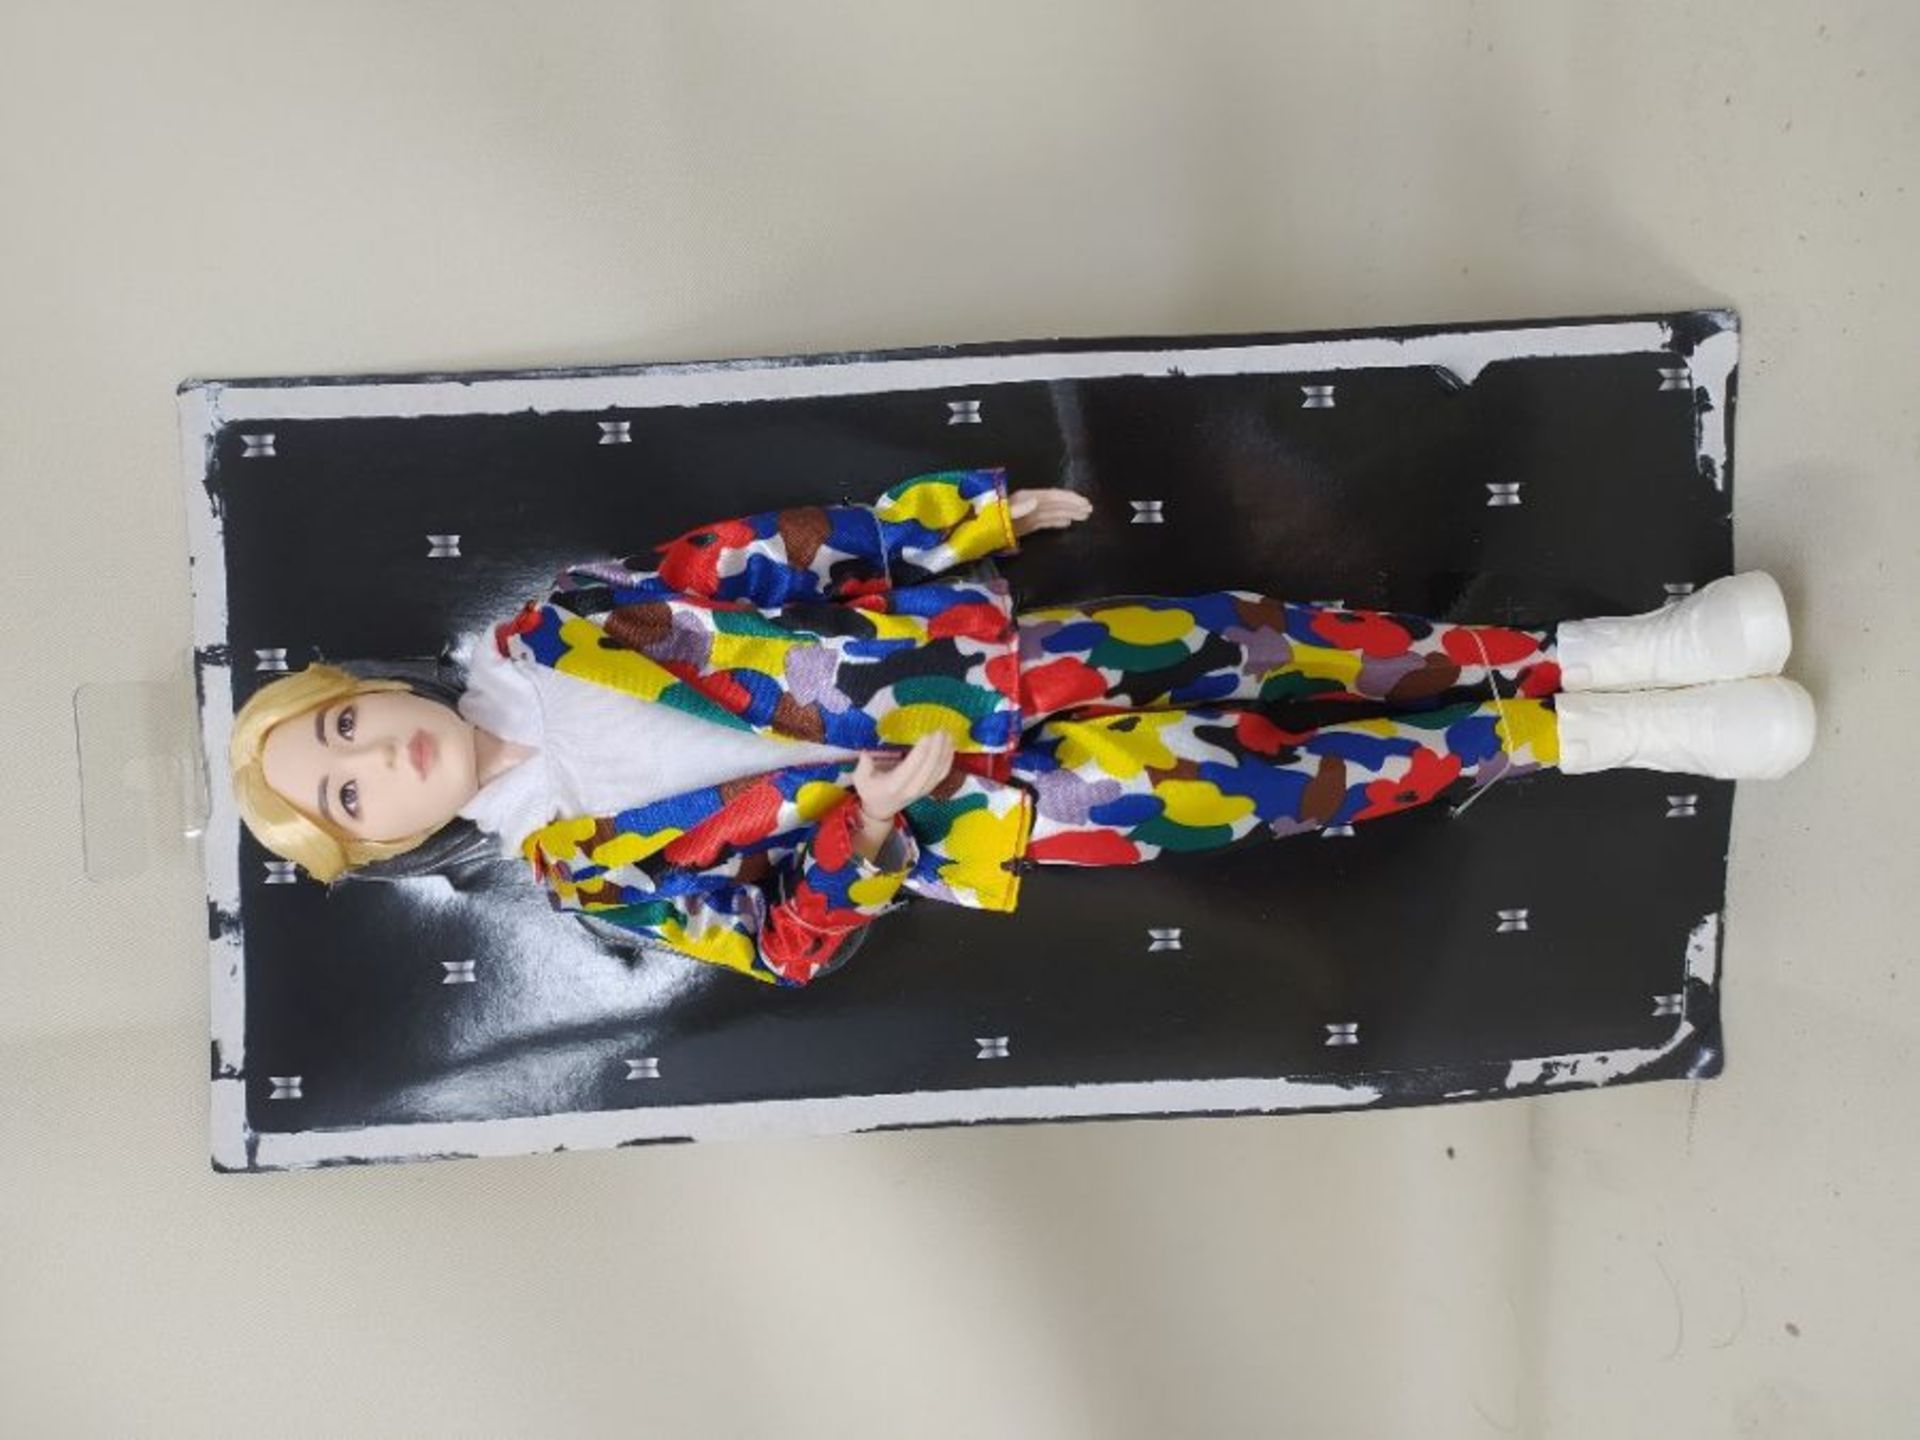 Mattel GKC88 BTS Jin Idol Fashion Doll for Collectors, K-Pop Toys Merchandise from 6 Y - Image 2 of 2